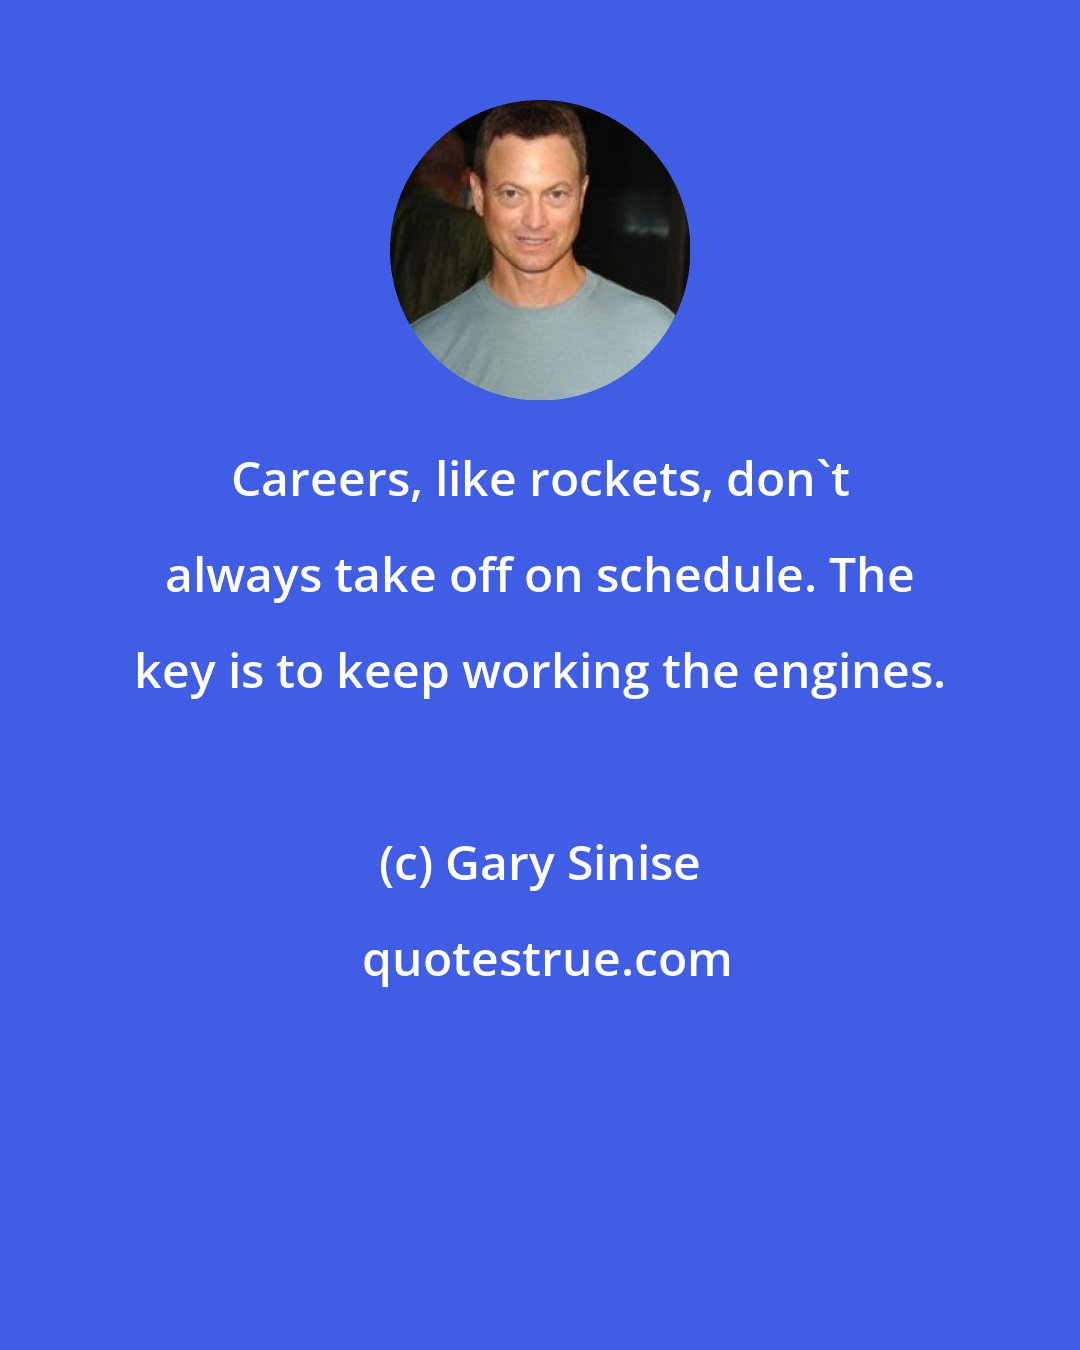 Gary Sinise: Careers, like rockets, don't always take off on schedule. The key is to keep working the engines.